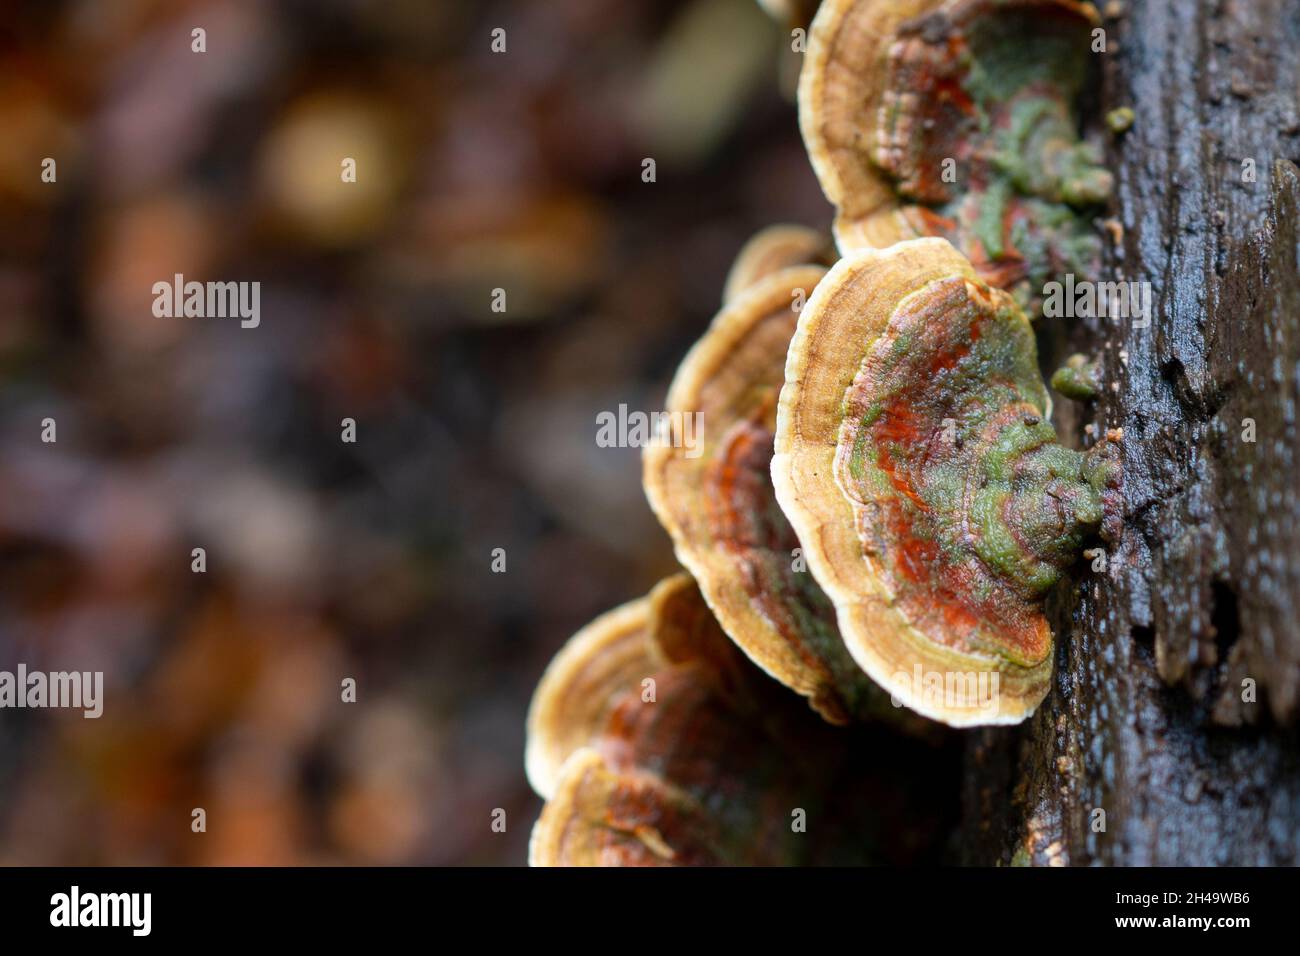 Turkeytails, a colourful bracket fungus growing on a tree trunk Stock Photo